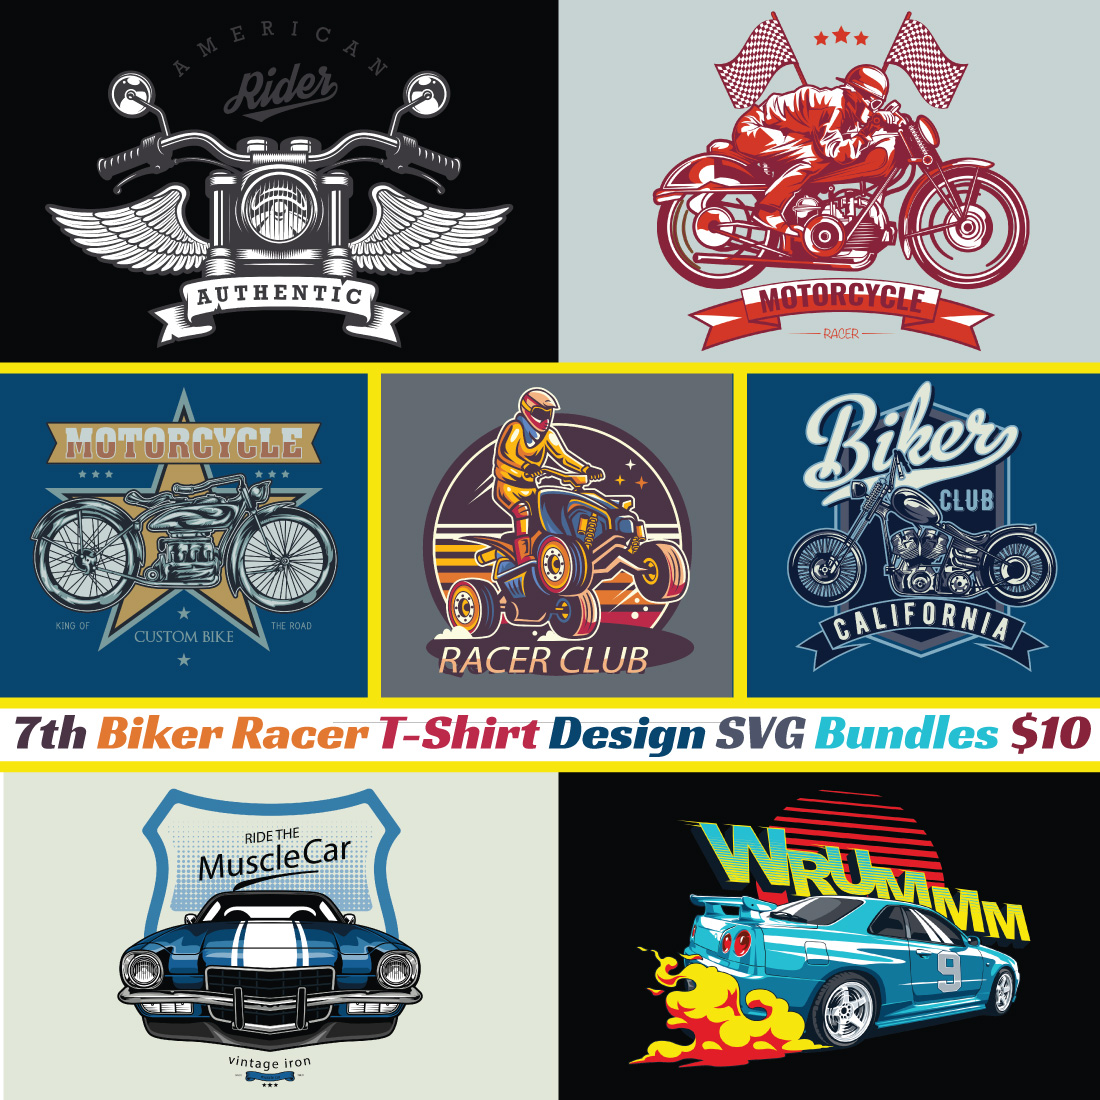 Motorcycle Racer Club T-shirt Design main cover.